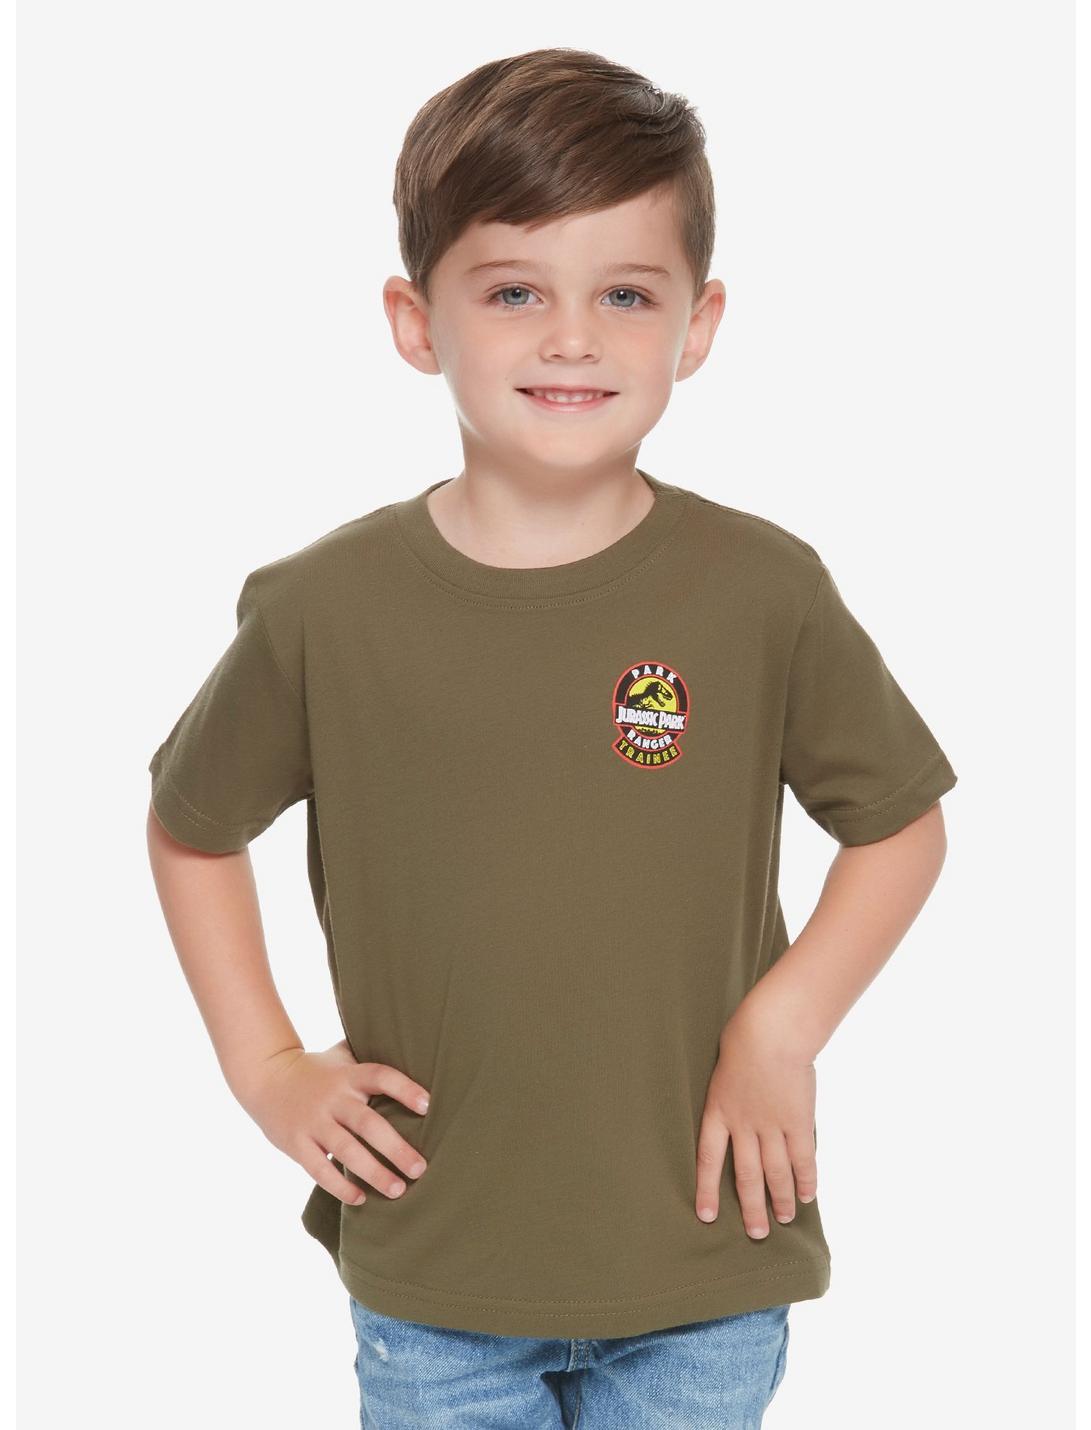 Jurassic Park Ranger Toddler Tee - BoxLunch Exclusive, OLIVE, hi-res